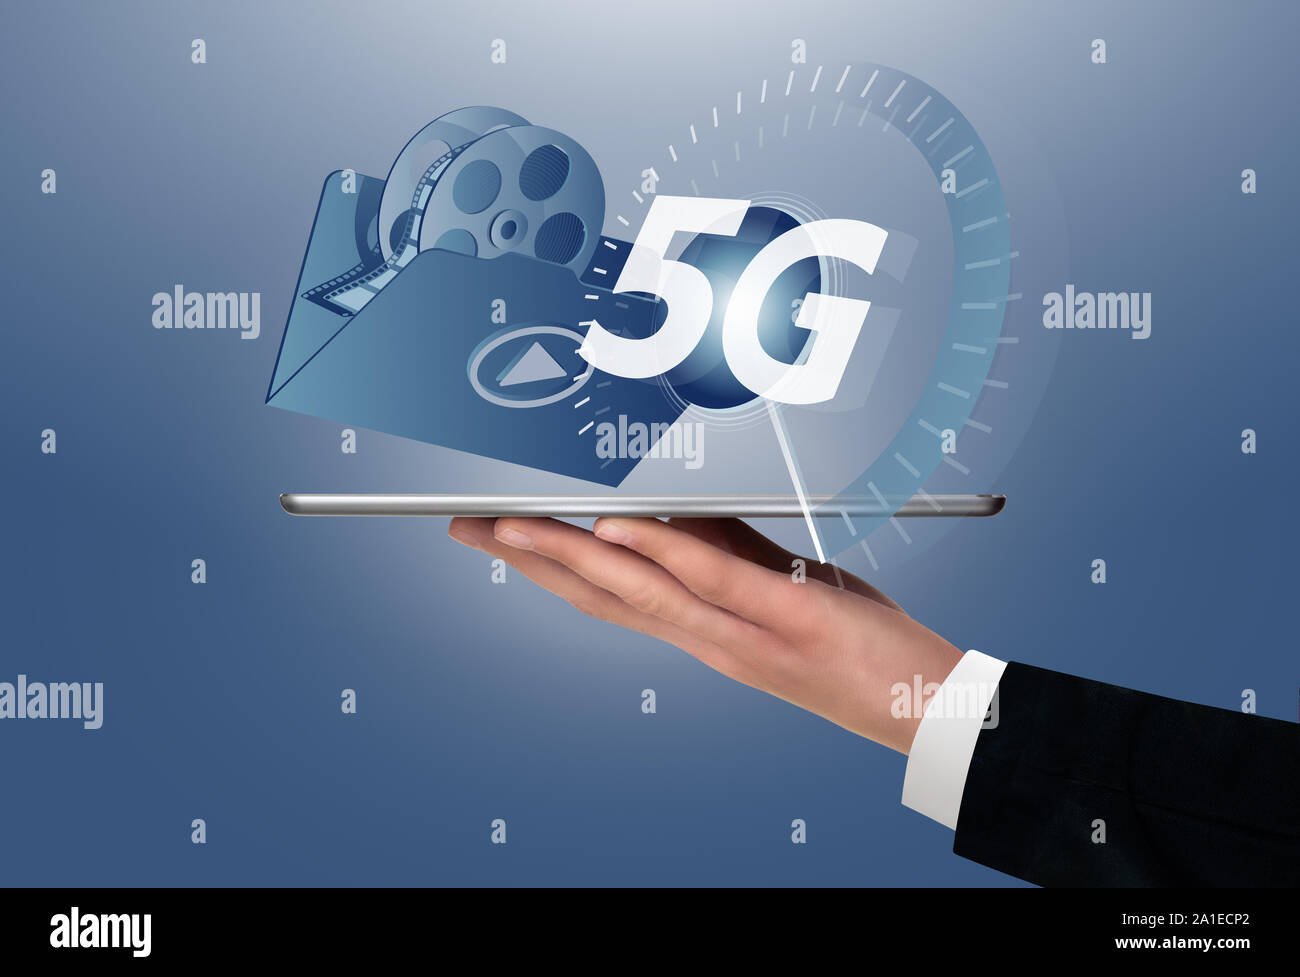 Man holding a digital tablet with symbol of 5G network connection. Stock Photo